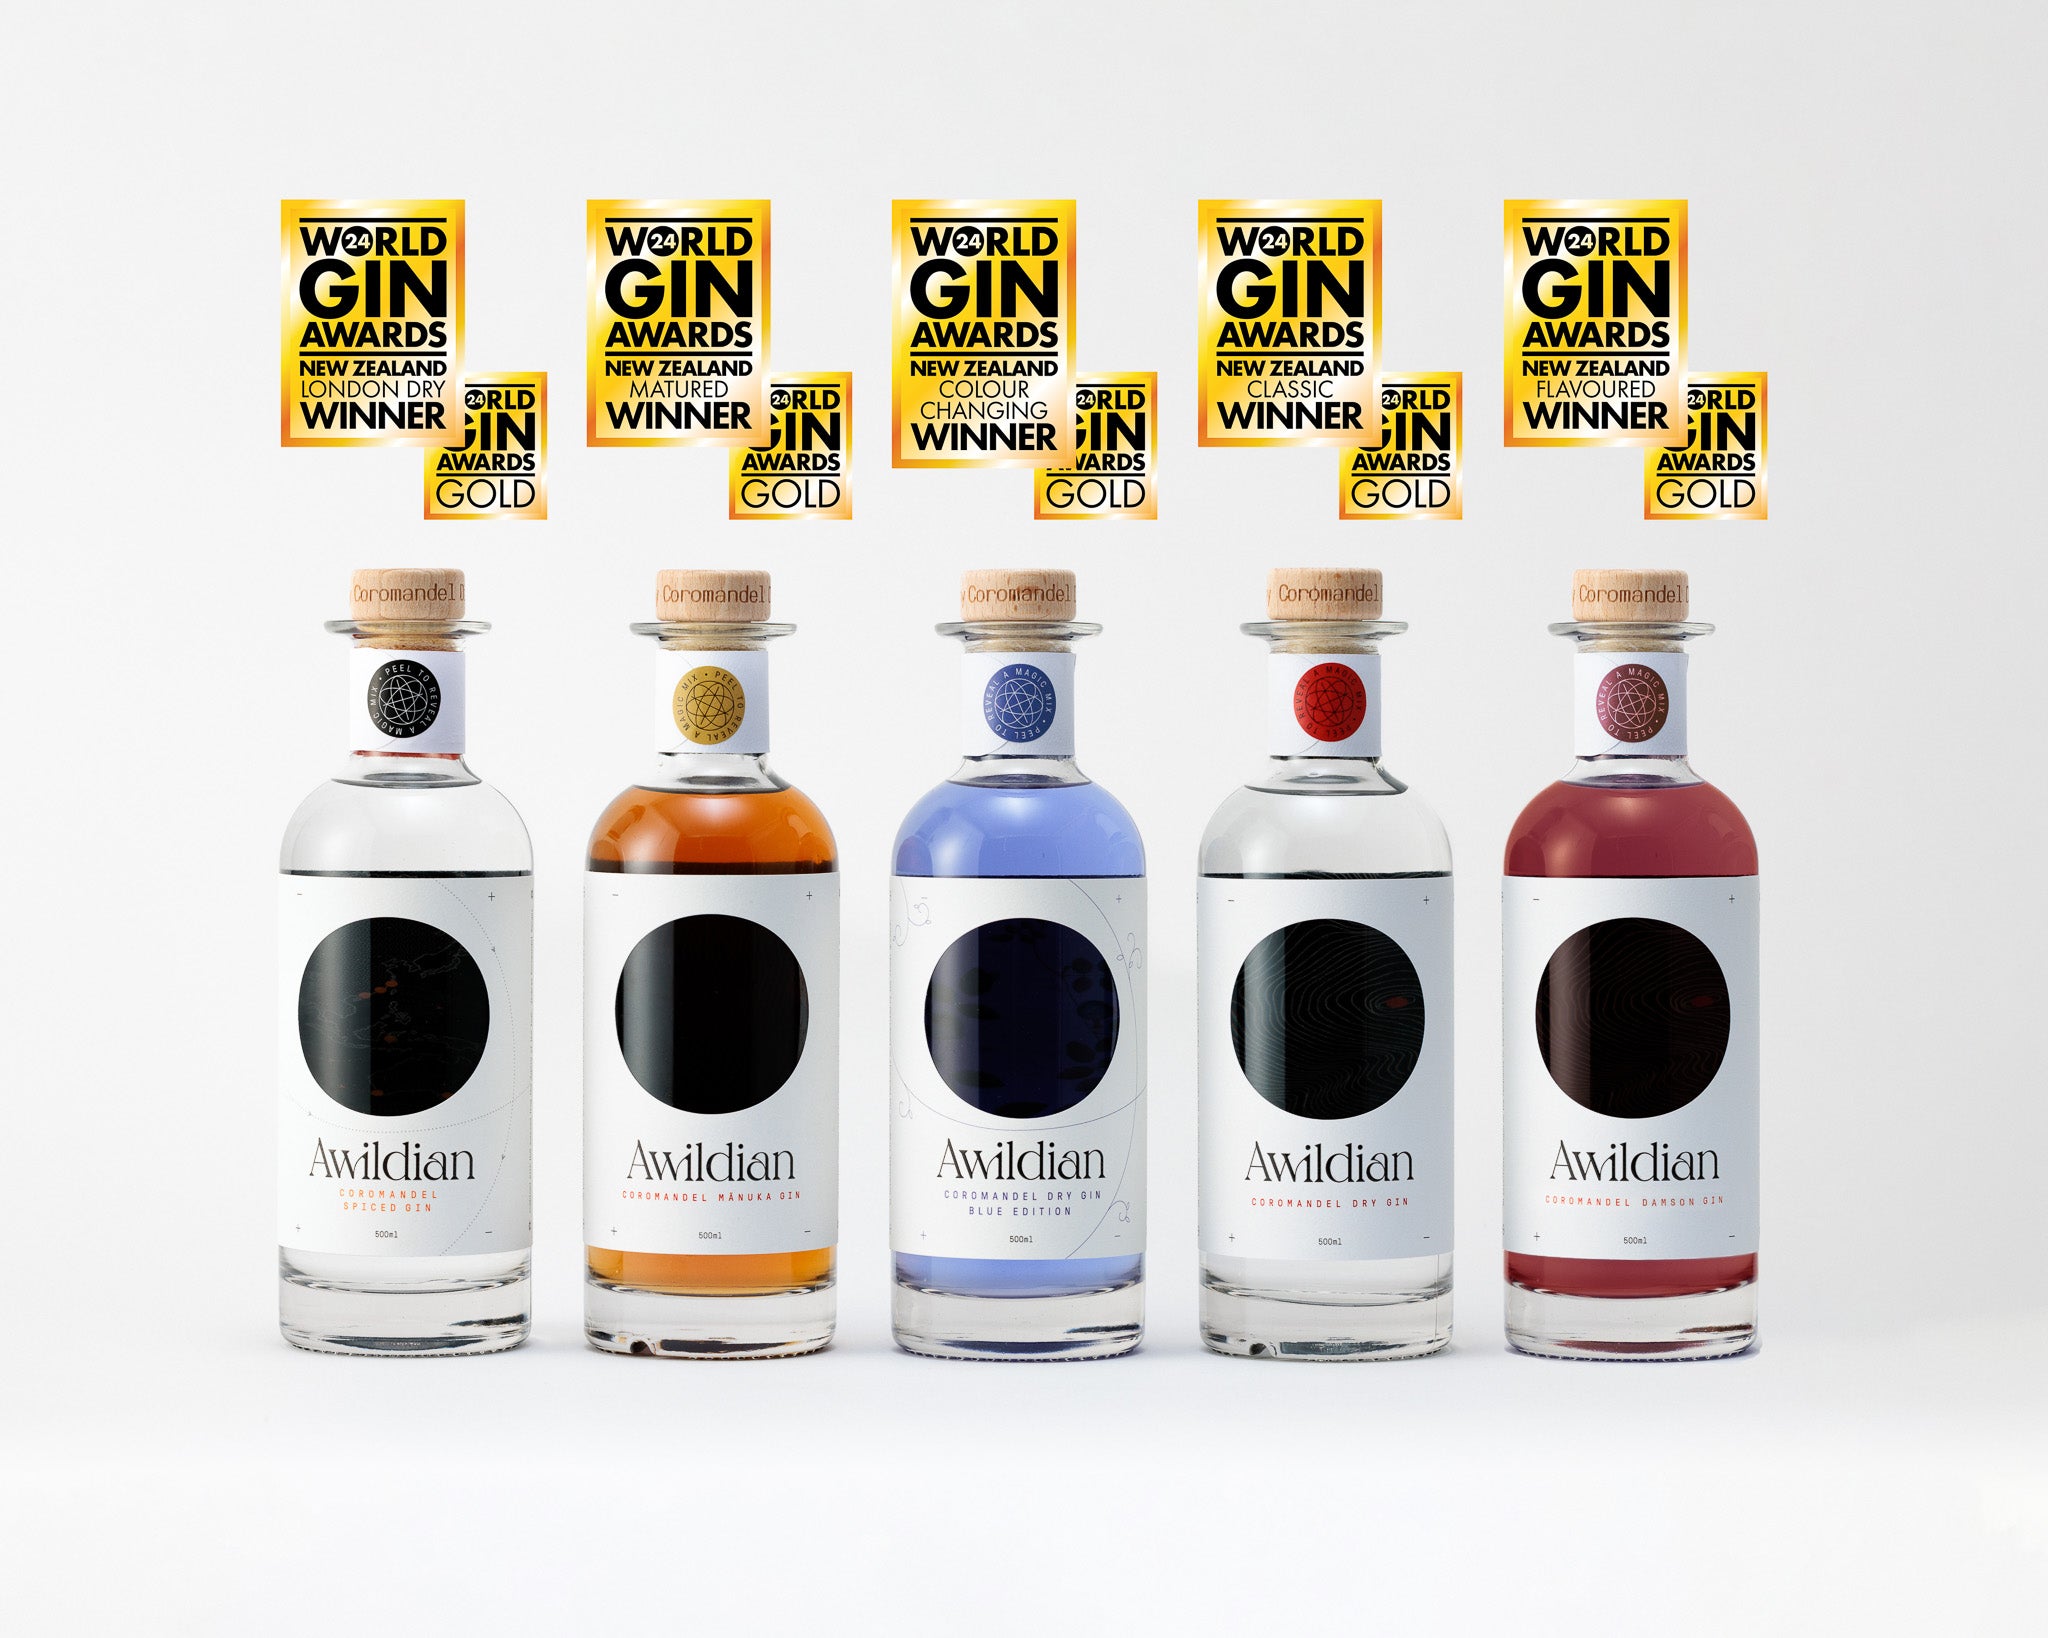 Awildian Gin is the first distillery to win five Country Winner Gold awards at the World Gin Awards